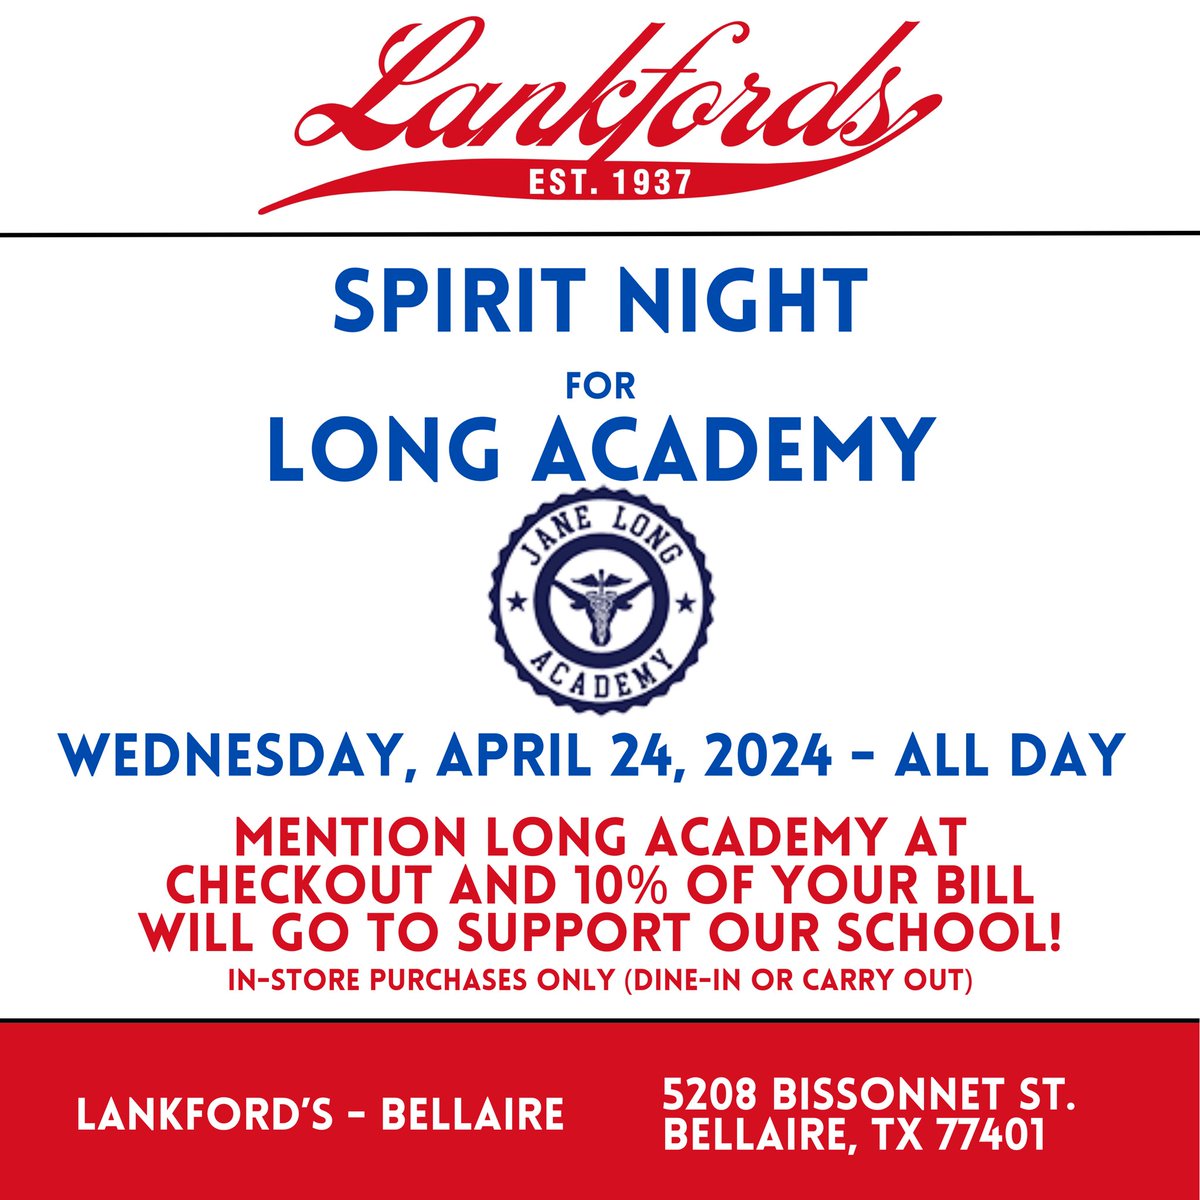 🚨COME OUT AND SUPPORT LONG ACADEMY THIS WEDNESDAY AT LANKFORD’S BELLAIRE!! MENTION LONG ACADEMY AT CHECKOUT! 🚨 #prescribingexcellence #PTECH @HISD_West @HoustonISD